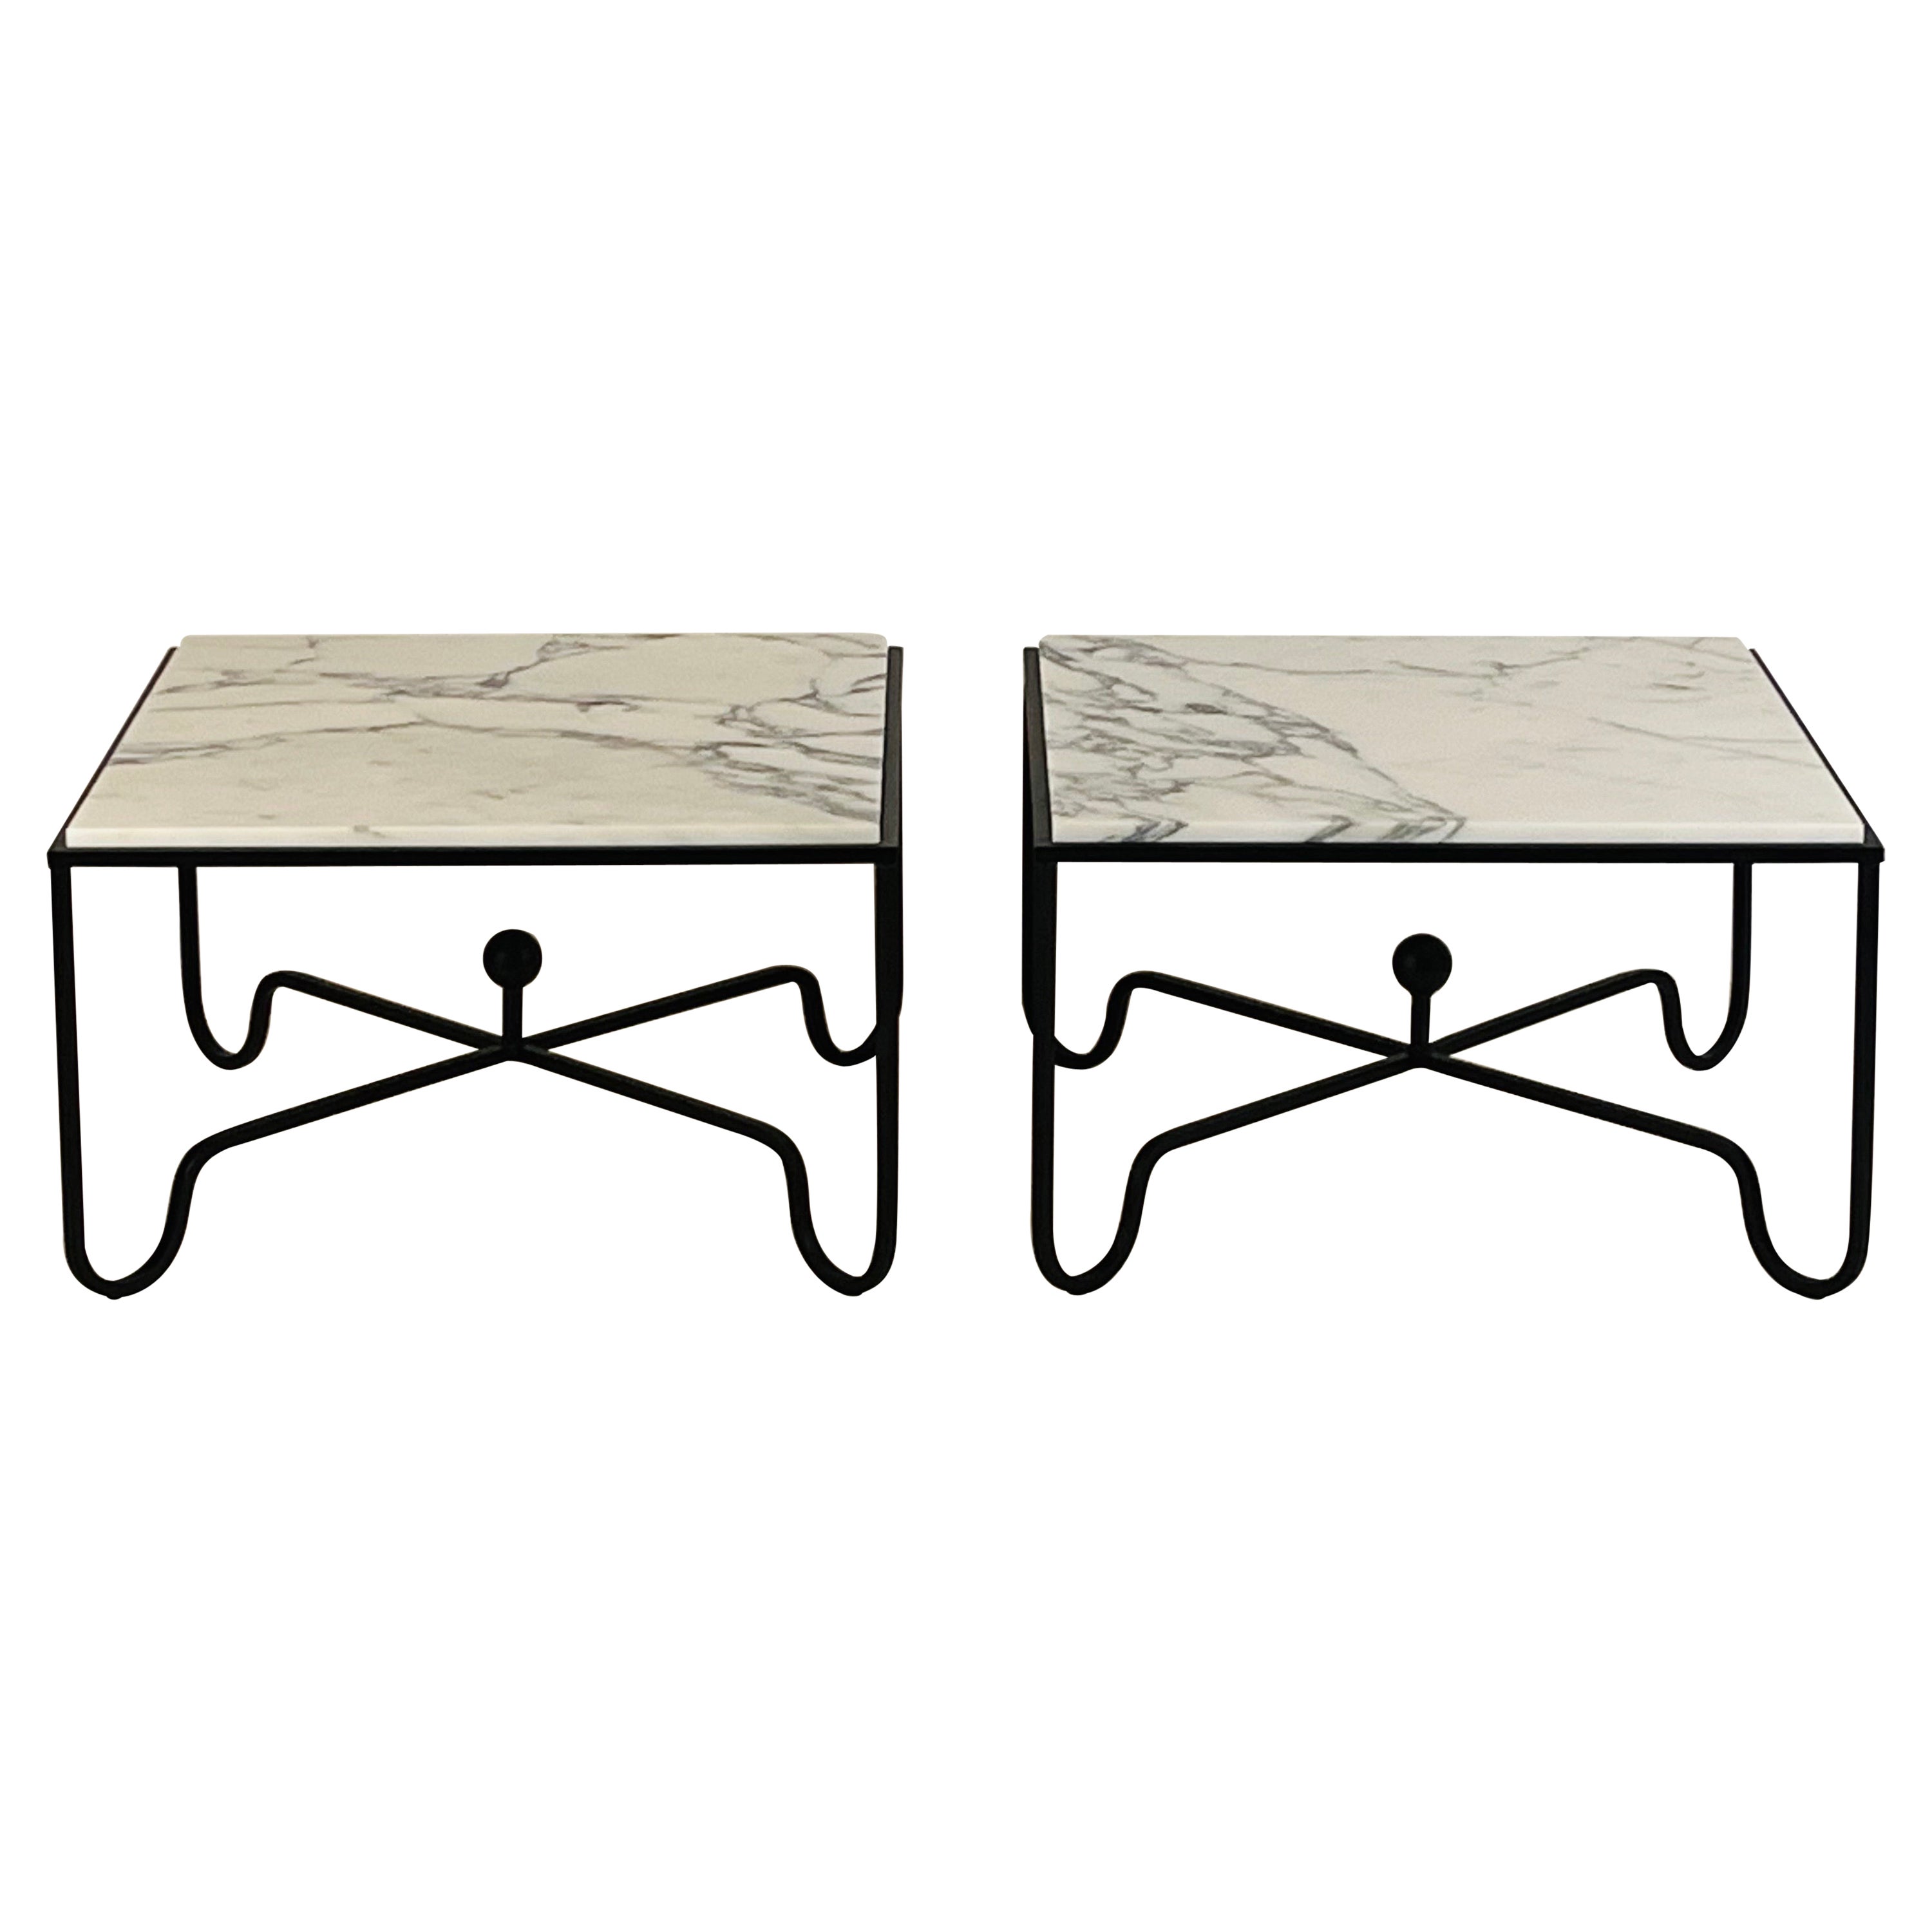 Pair of Chic Arabescato Marble 'Entretoise' Side or End Tables by Design Frères